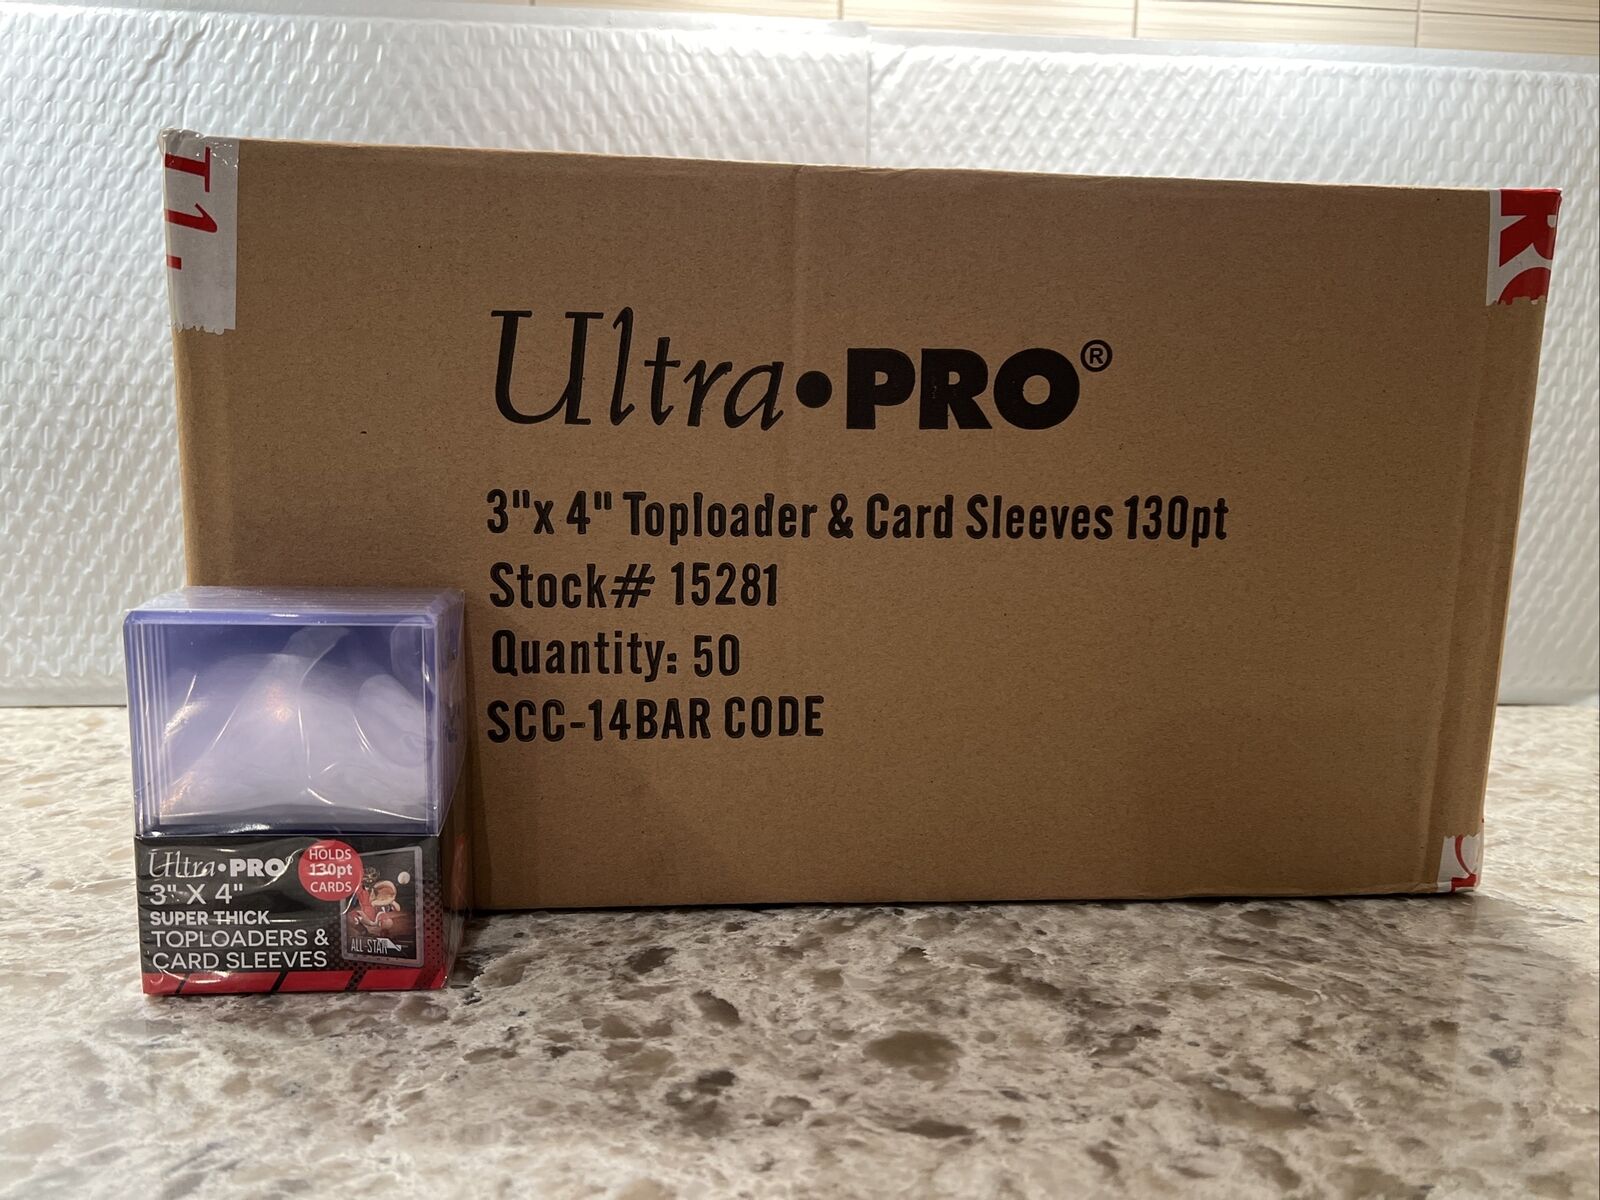 Ultra Pro 3X4 Super Thick Toploaders 130pt 50 Packs of 10 WITH SLEEVES 500 total